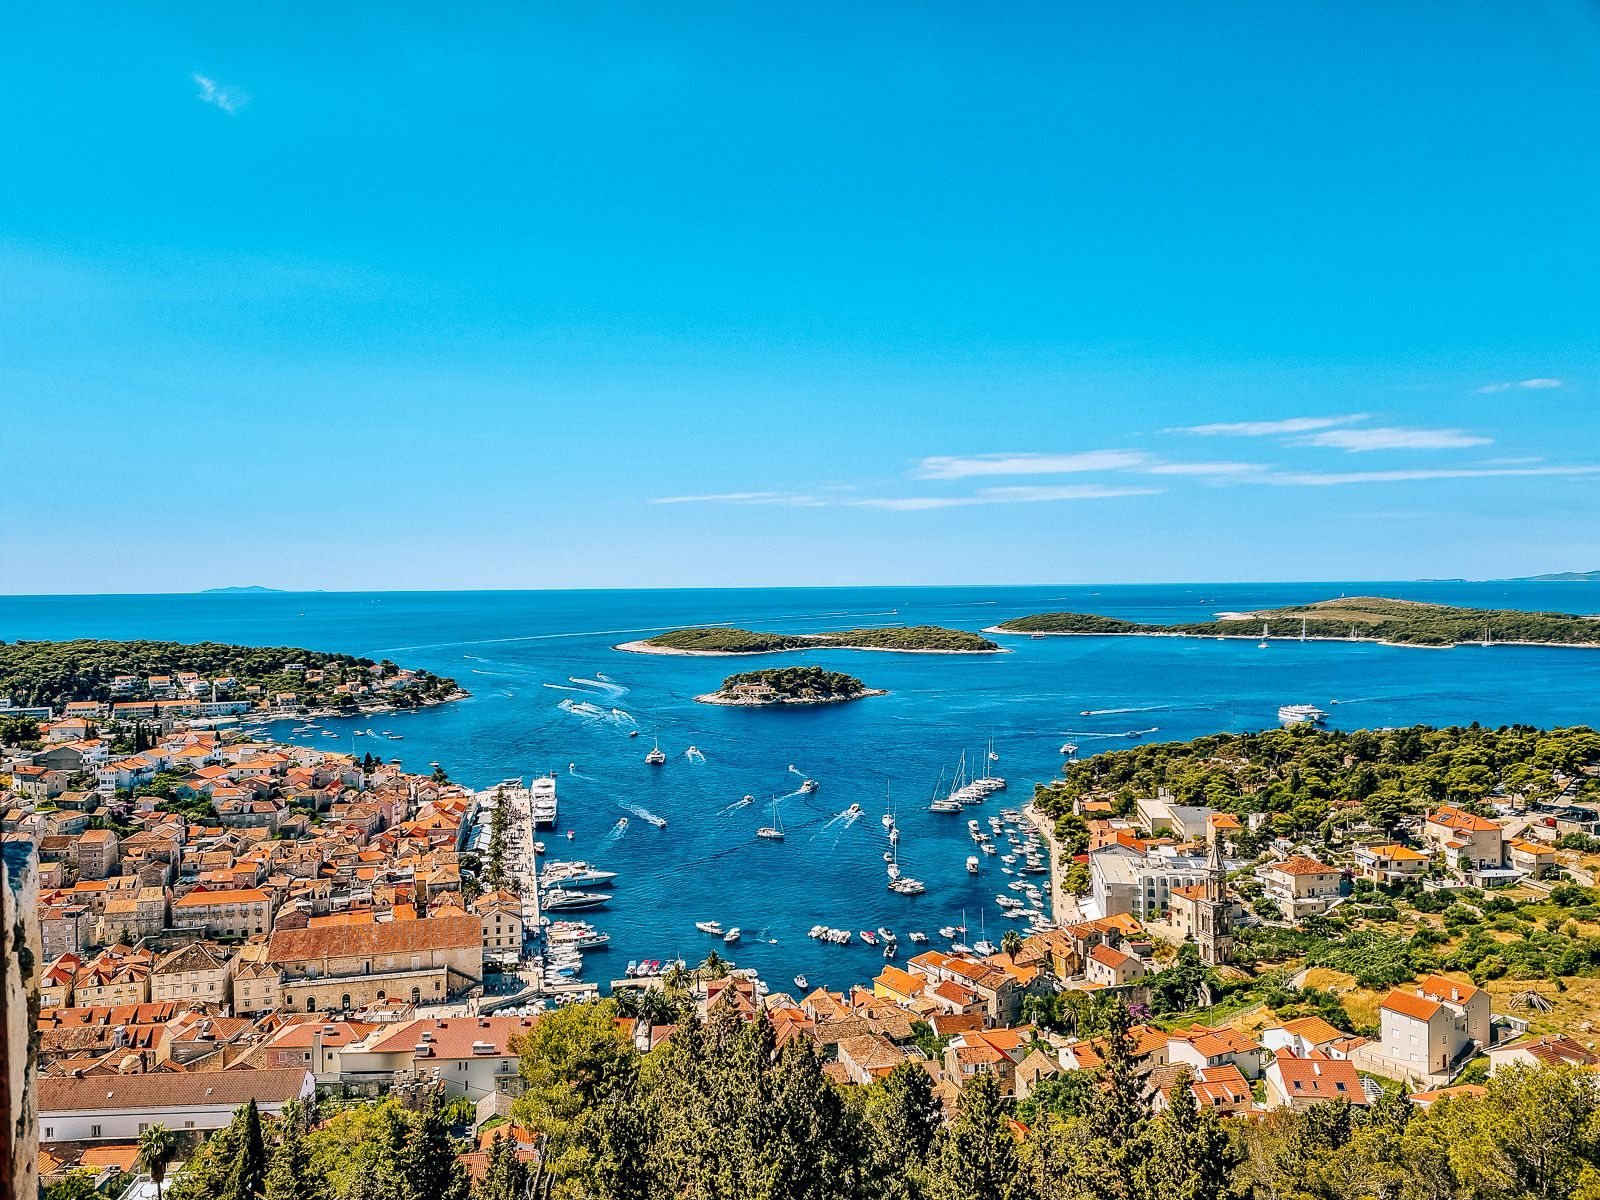 Looking down on a town harbour surrounded by orange rooftops and many boats in the harbour. Islands in the distance. Sea and sky are blue